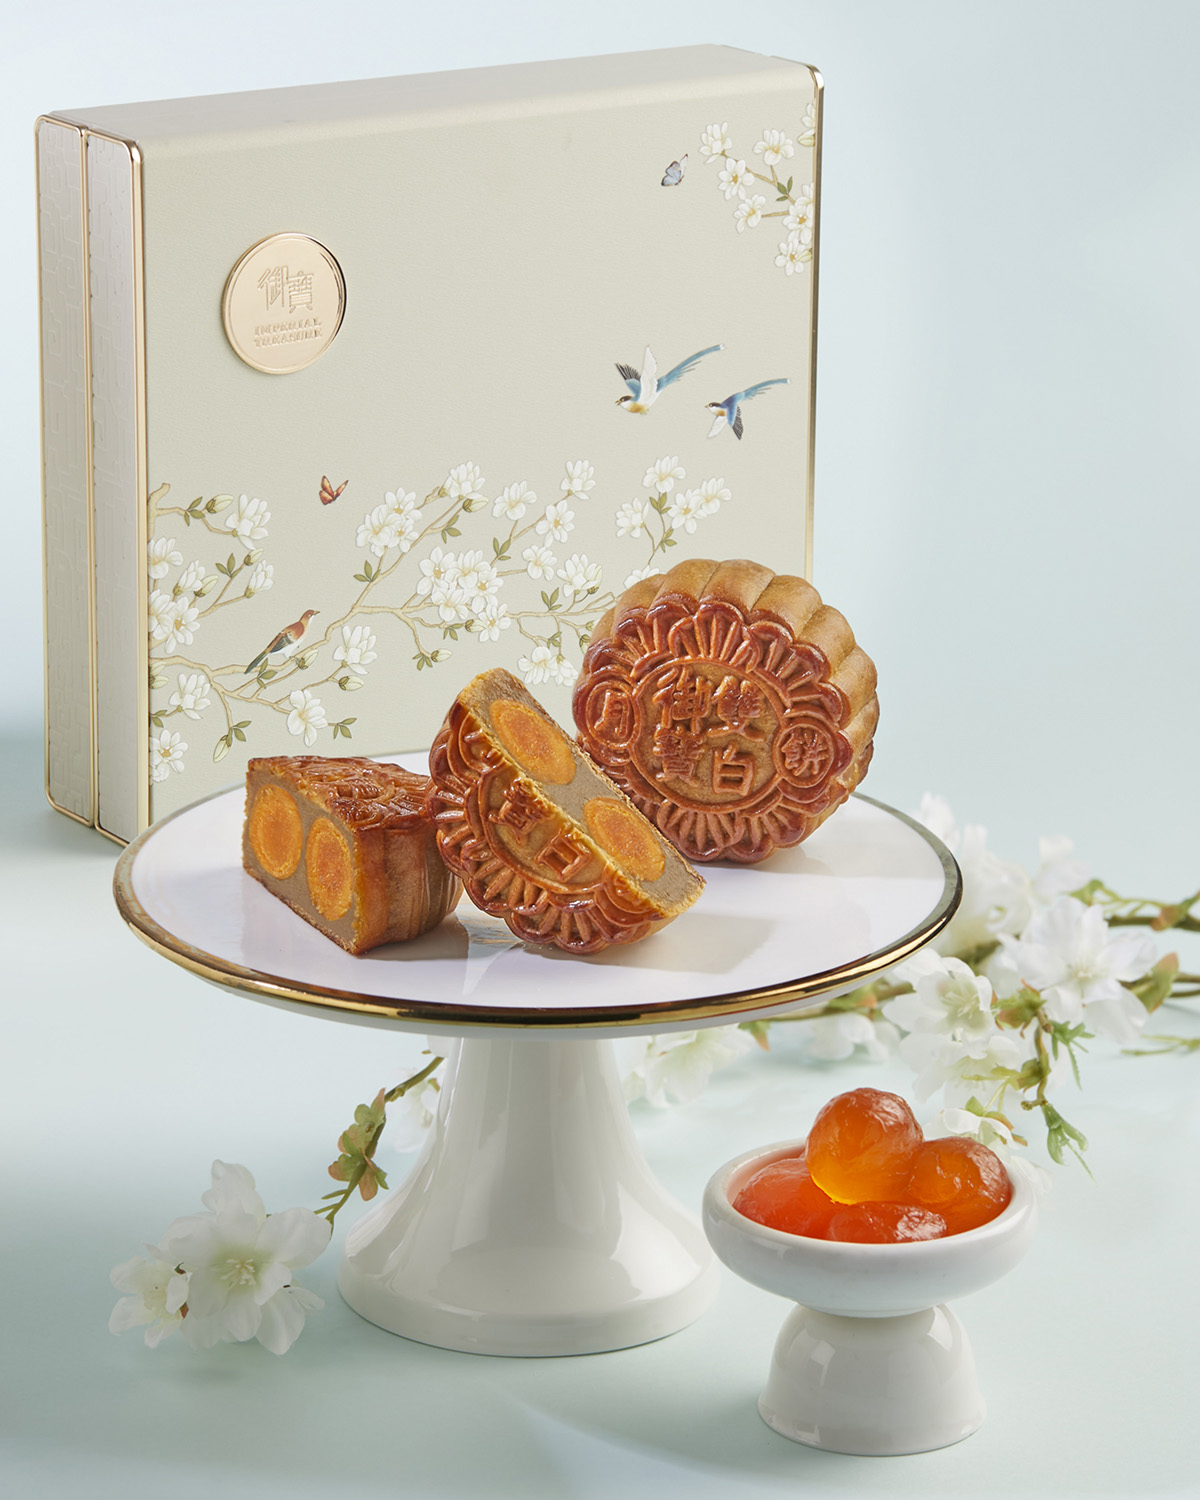 Imperial Treasure presents a delectable collection including Double Yolk White Lotus Paste Mooncakes